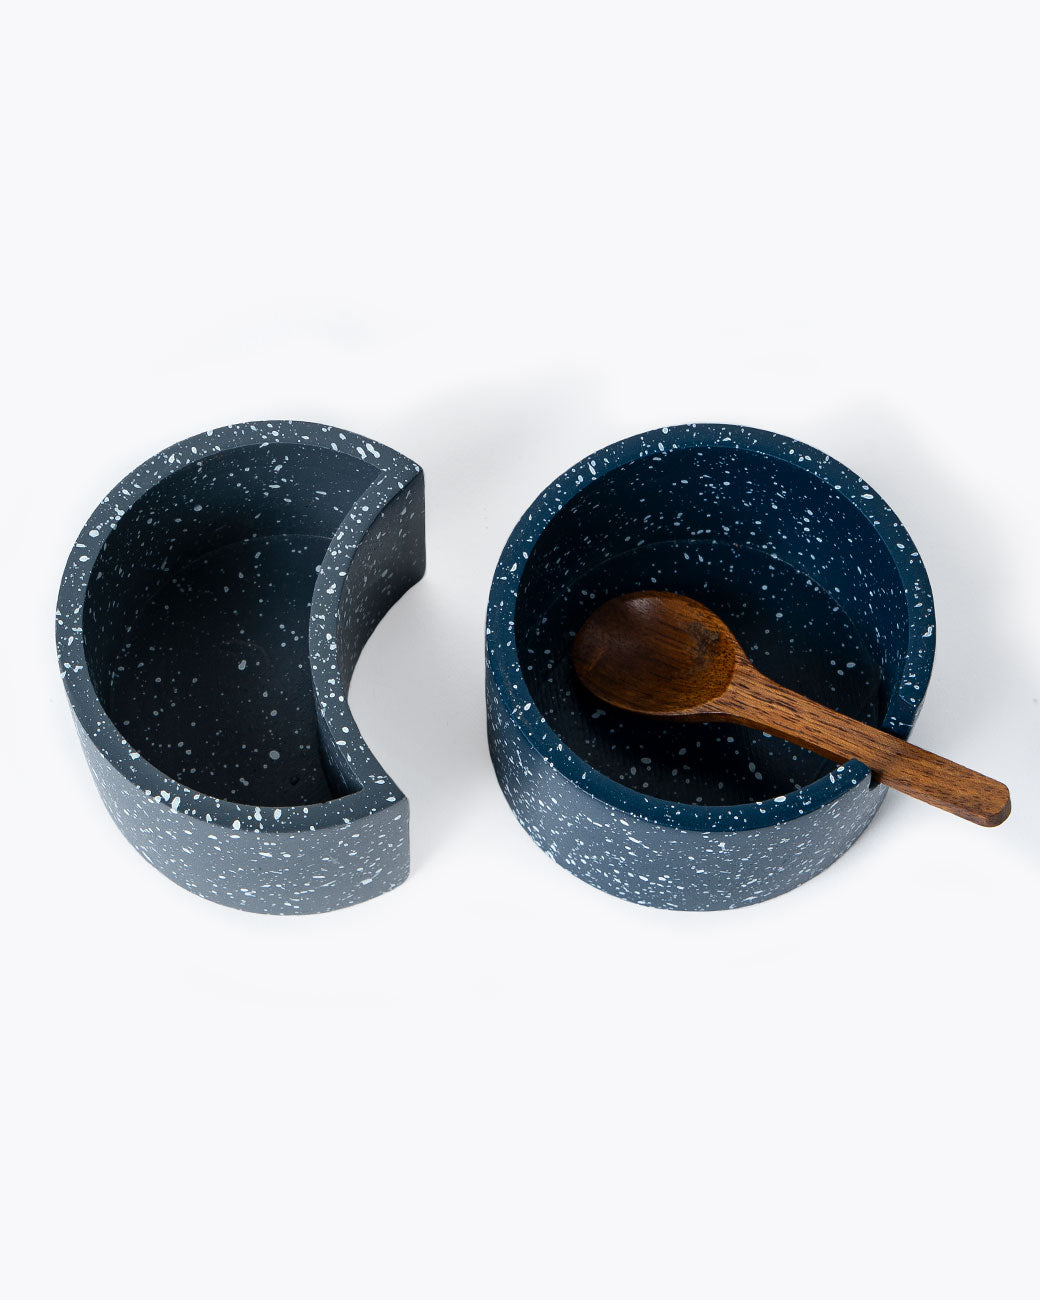 Interlocking circular salt cellar made of speckled blue and gray cement with wood lid and spoon, shown from the top without the lids.